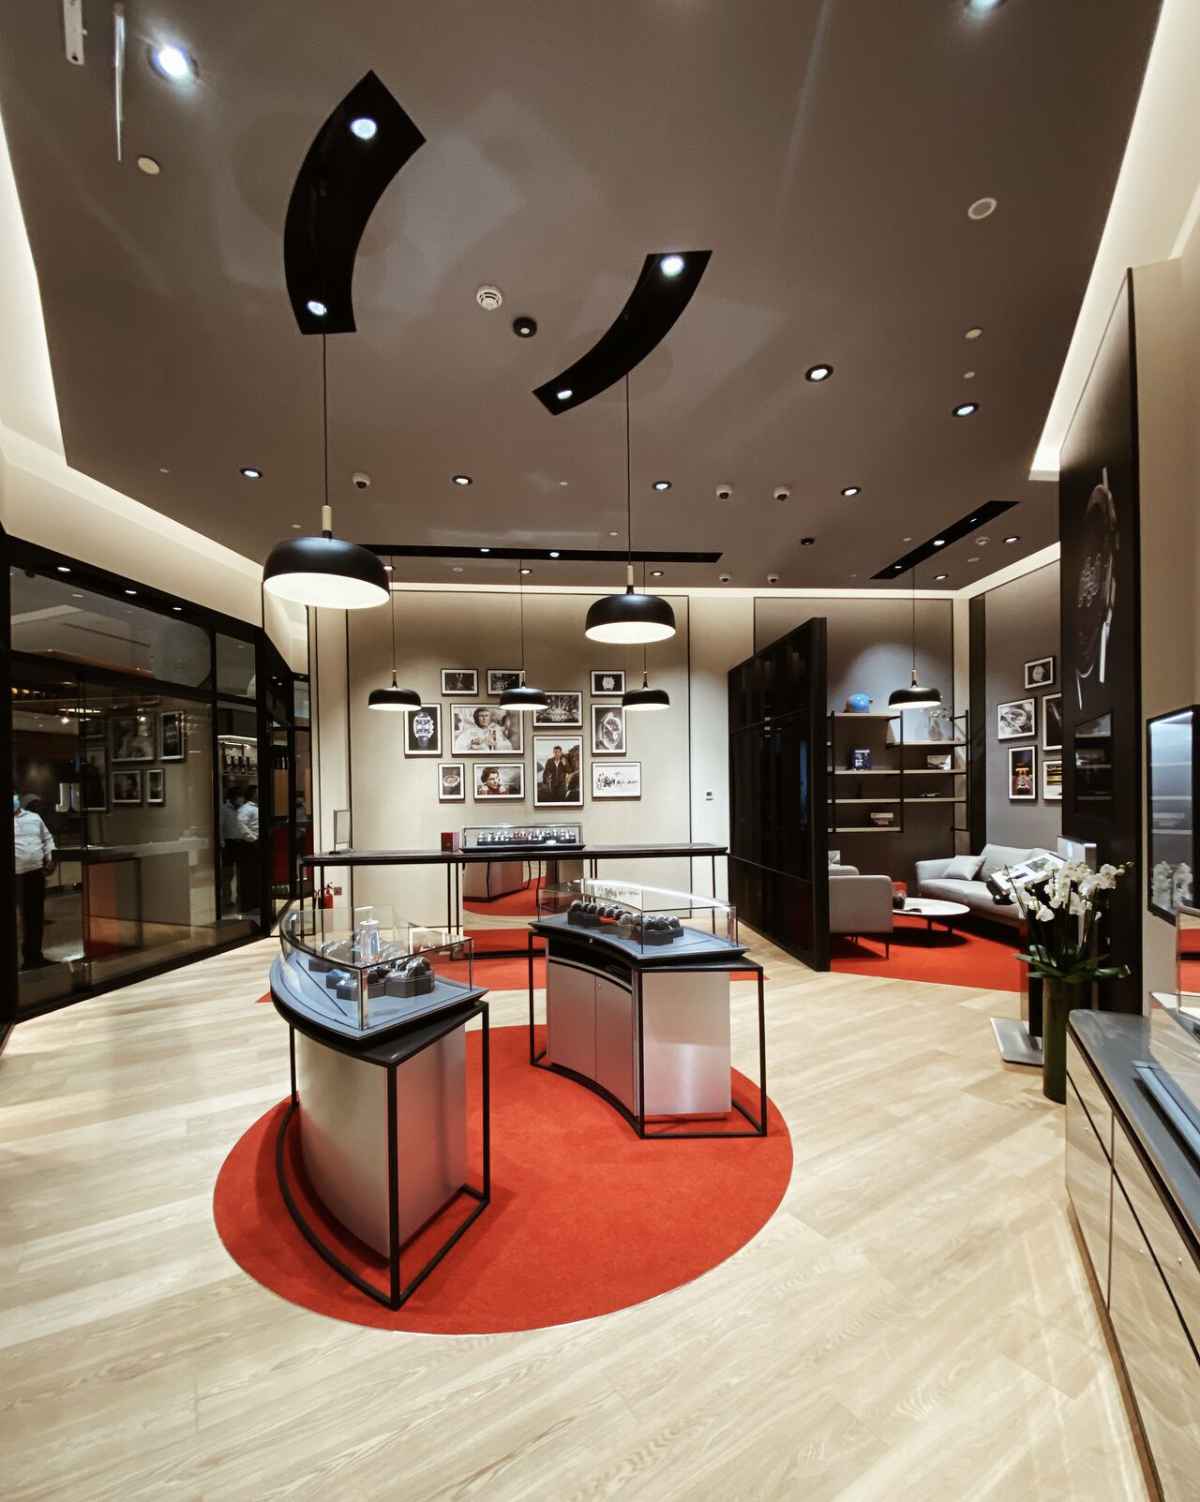 Second TAG Heuer boutique officially opened in 360 Mall, Kuwait City